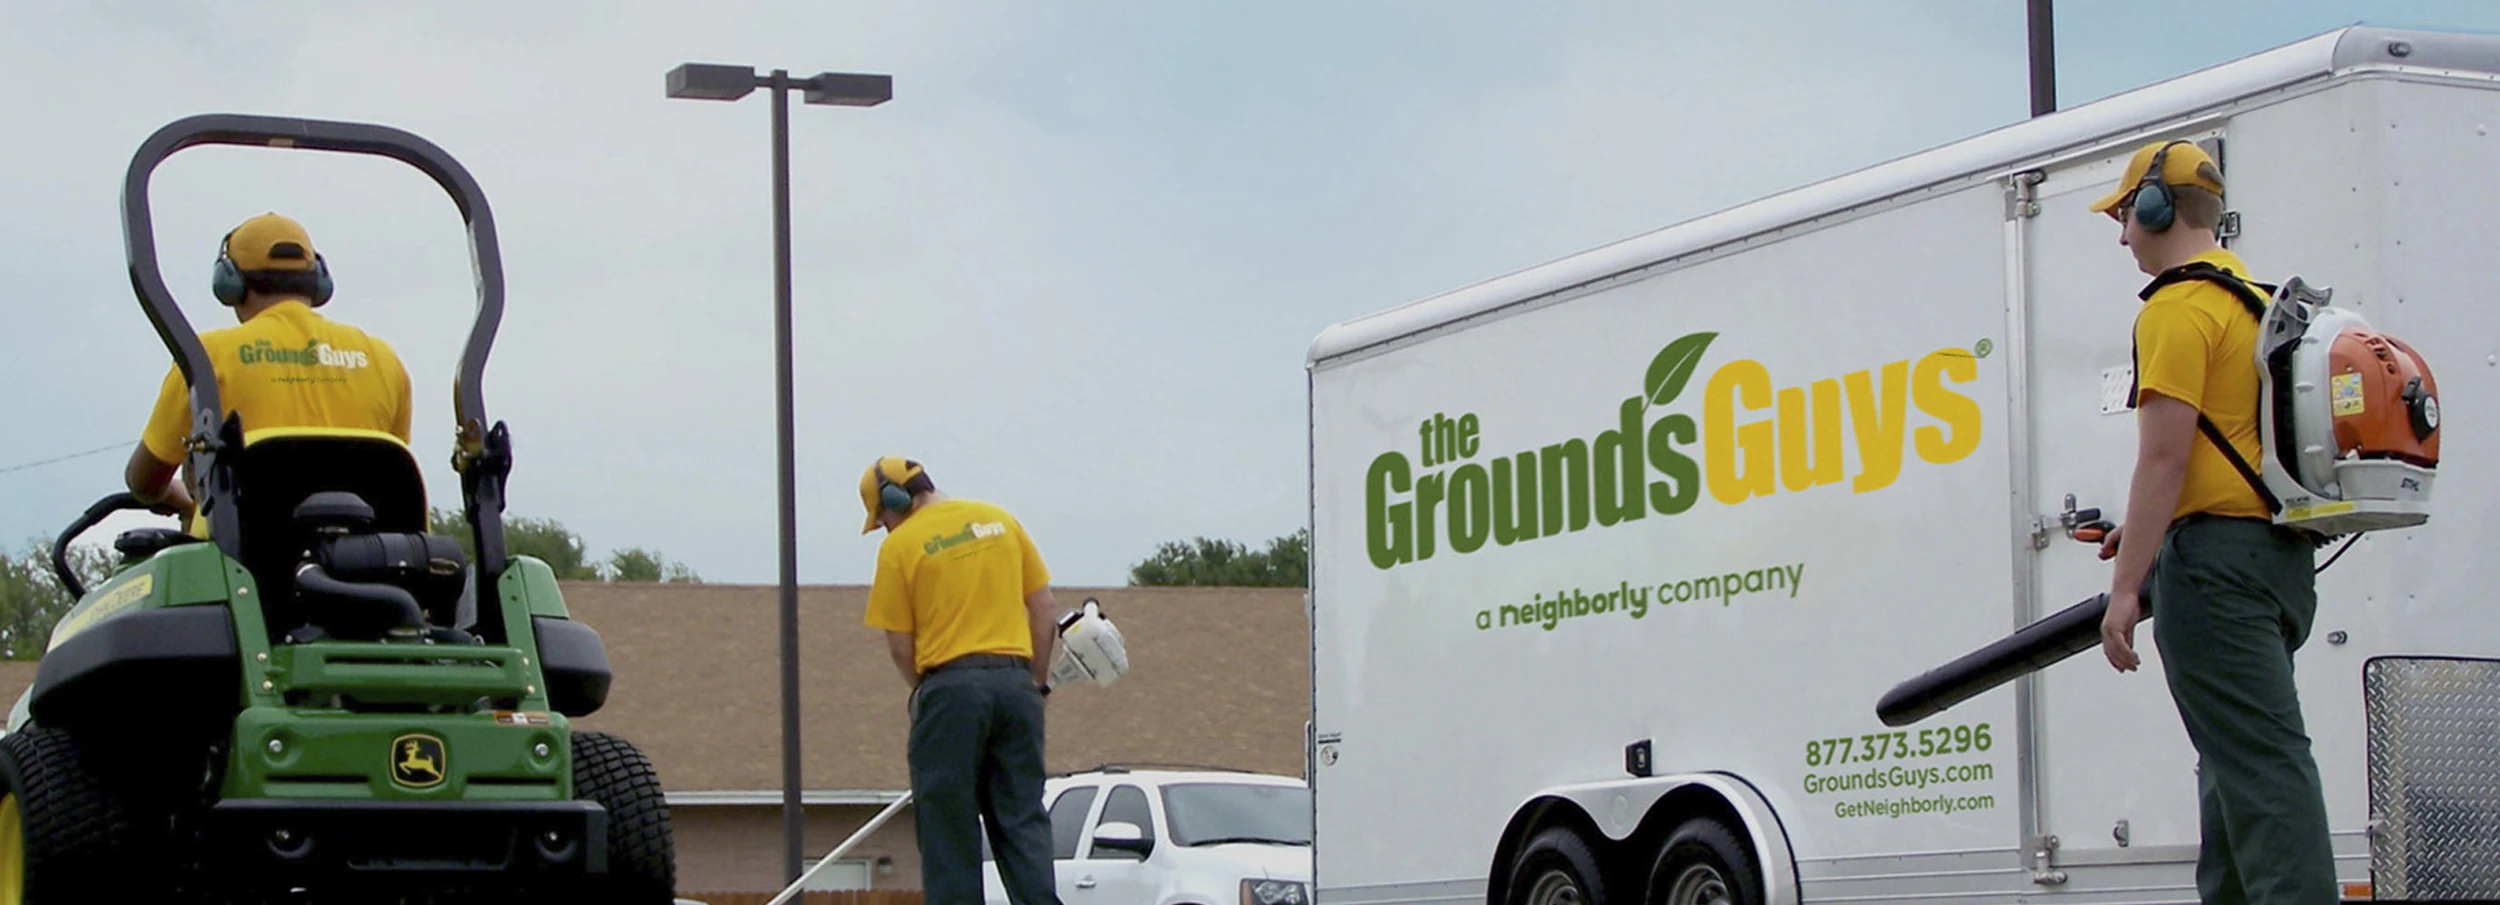 Three Grounds Guys employees performing lawn cleanup next to white trailer displaying Grounds Guys logo.